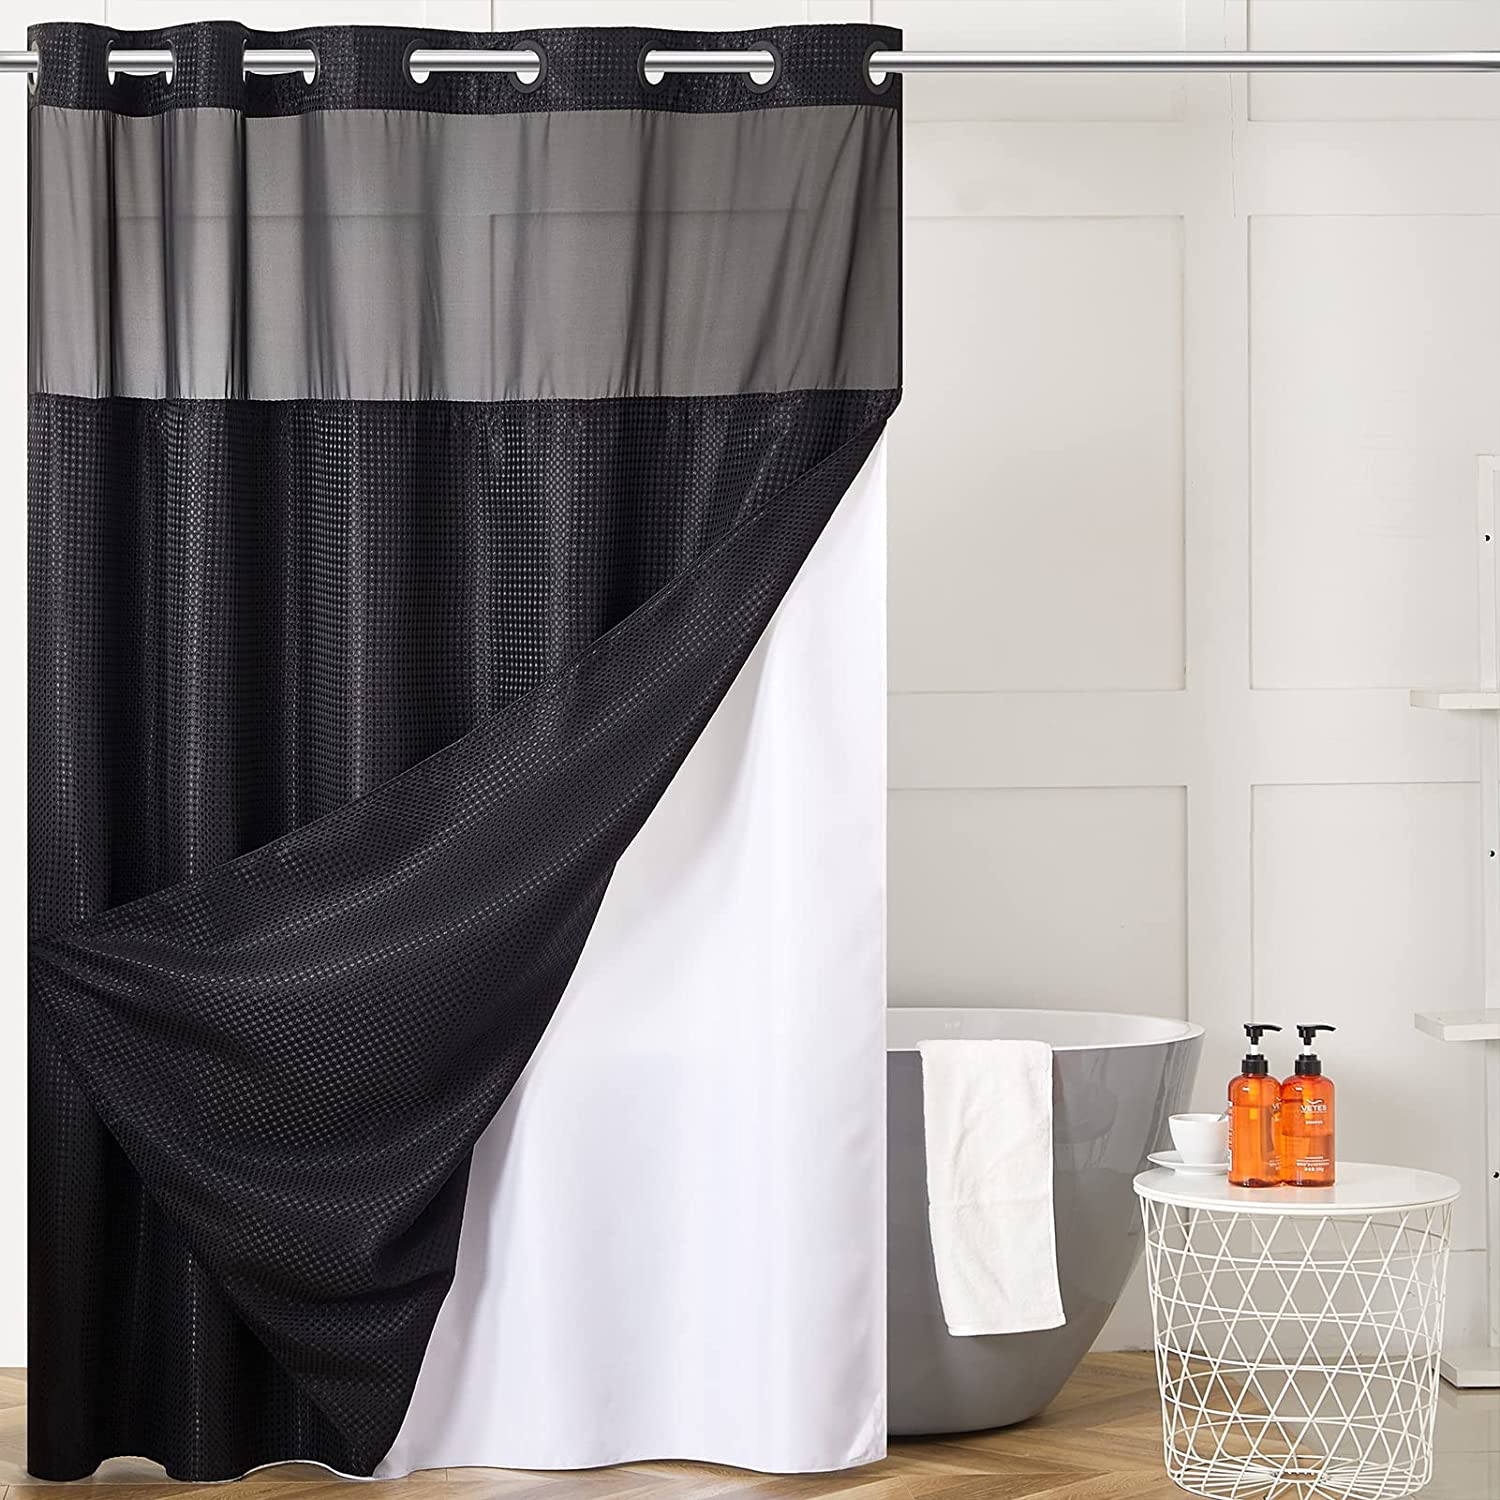 Shower Curtain Set with Snap-in Liner, No Hooks Needed